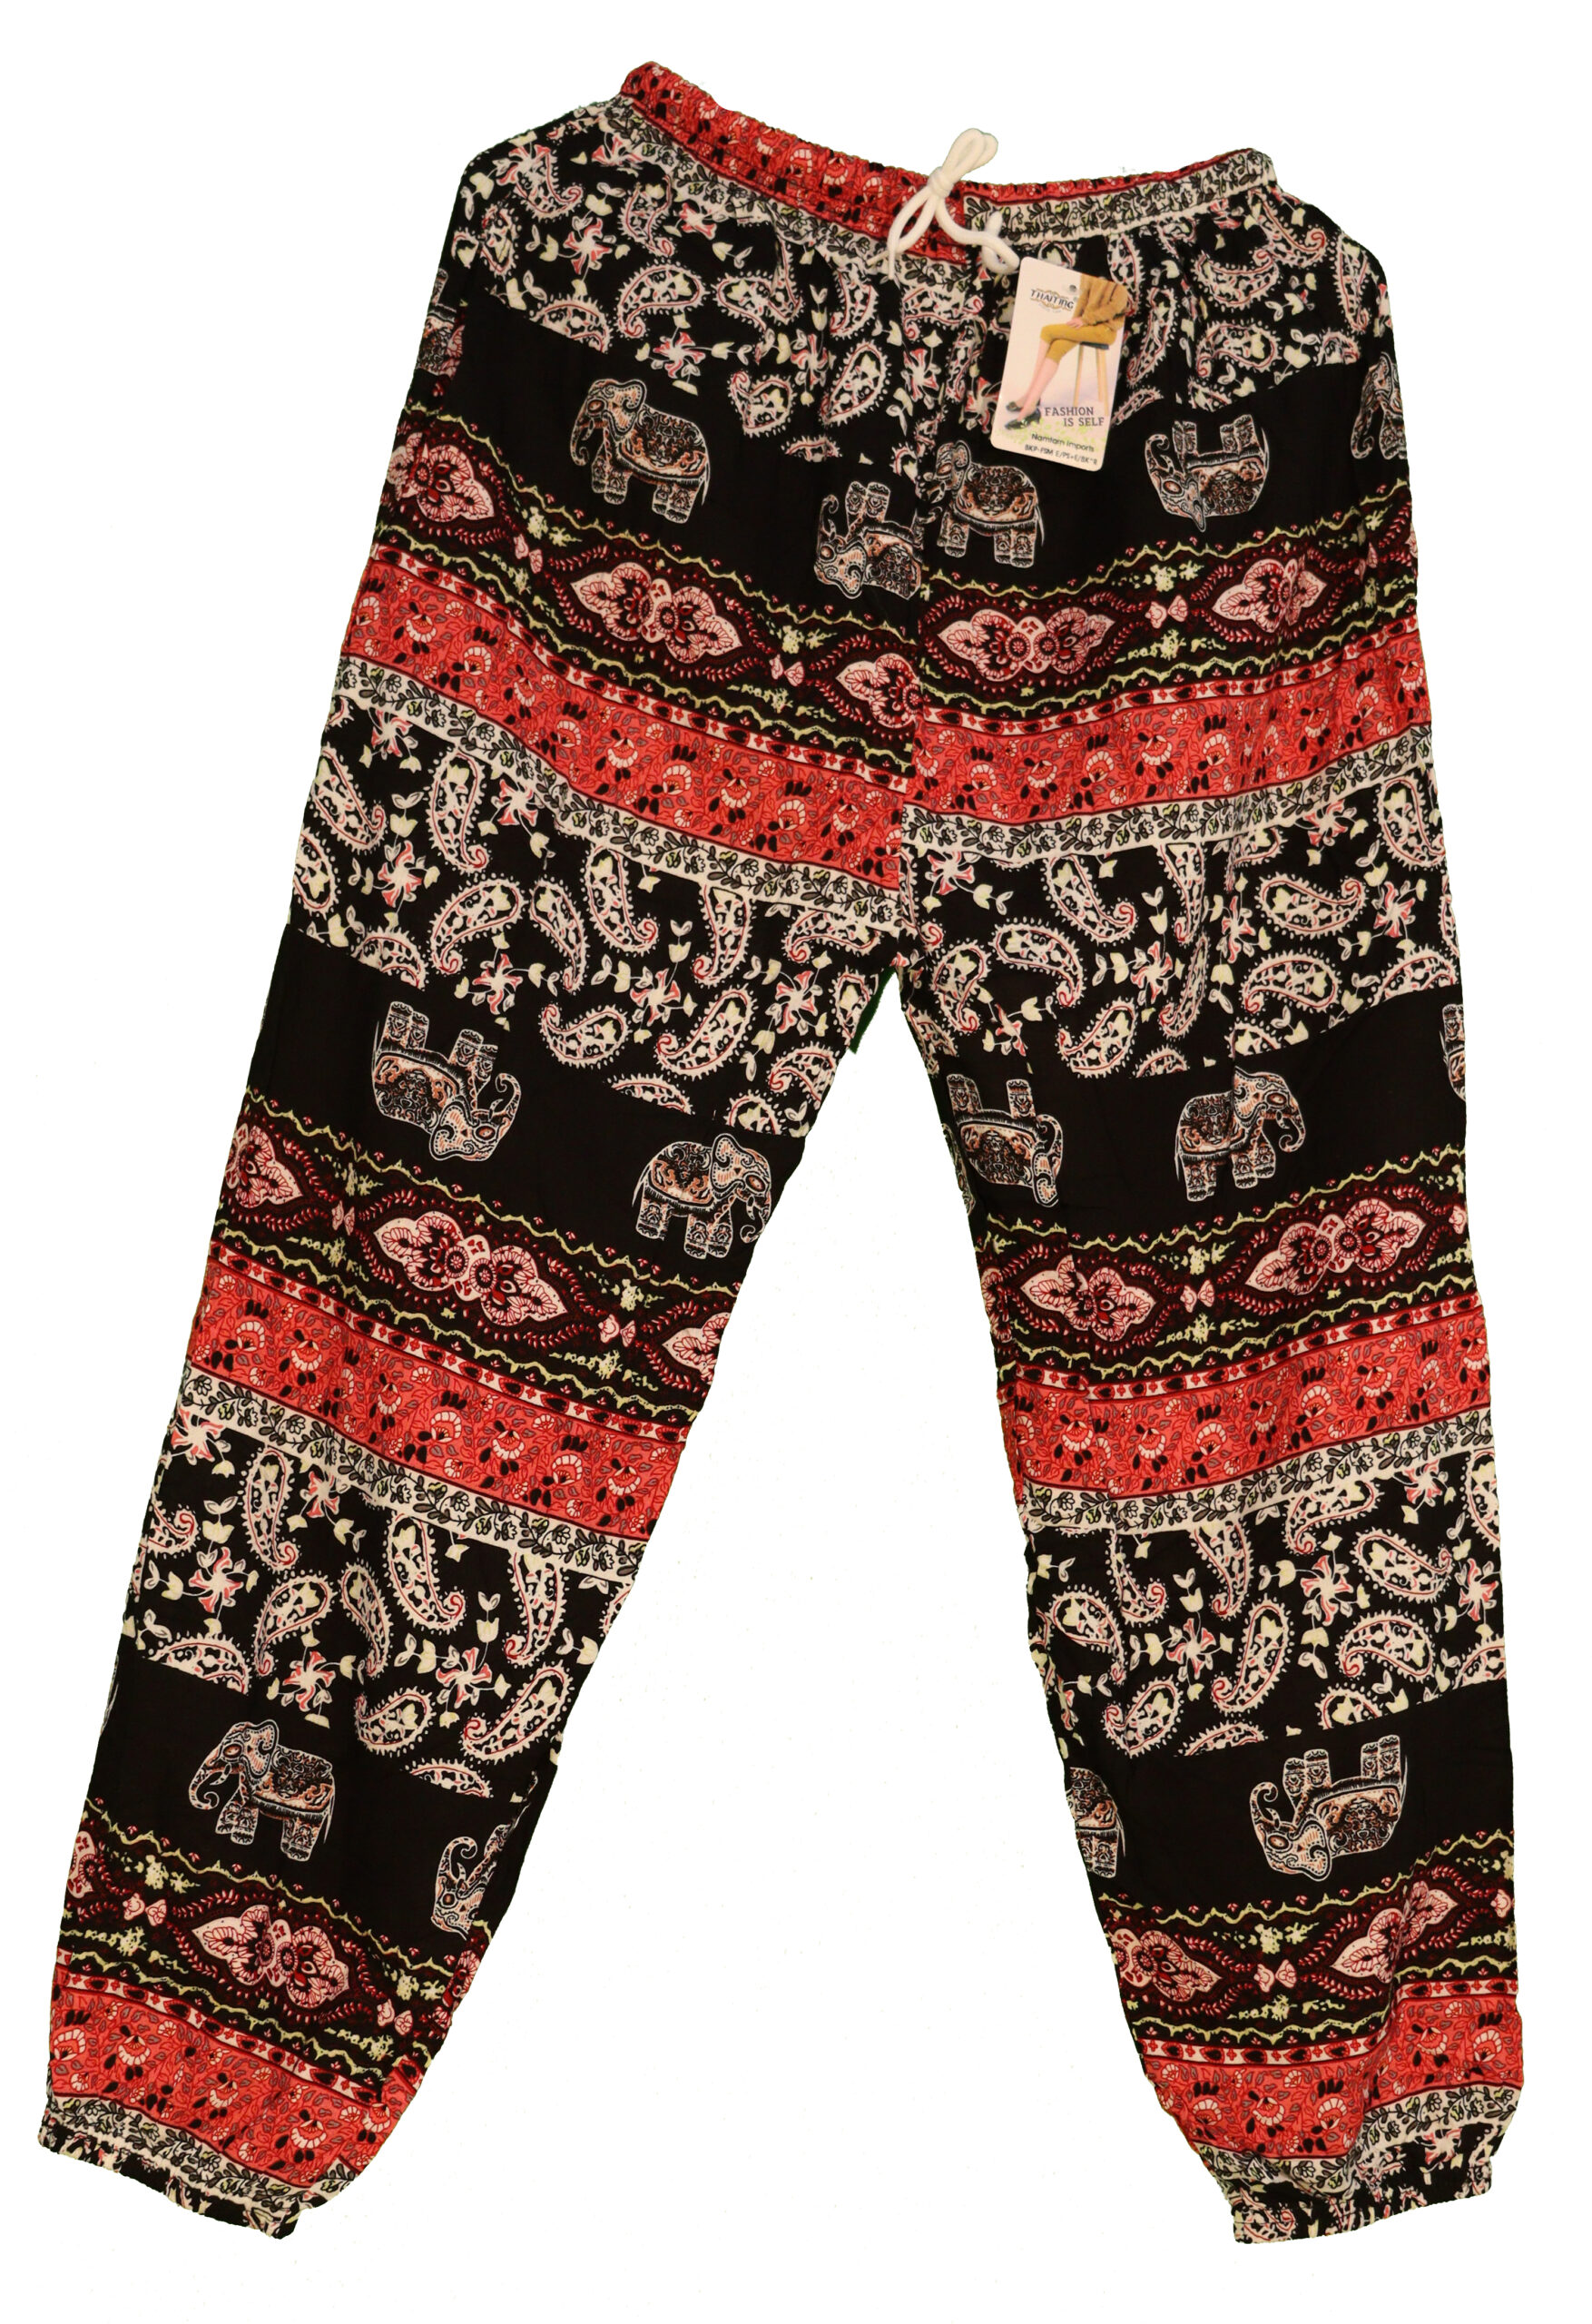 Bangkok Pants / Free Size Small / Elastic Ankle / Paisley + Elephants Pattern / Black with Red